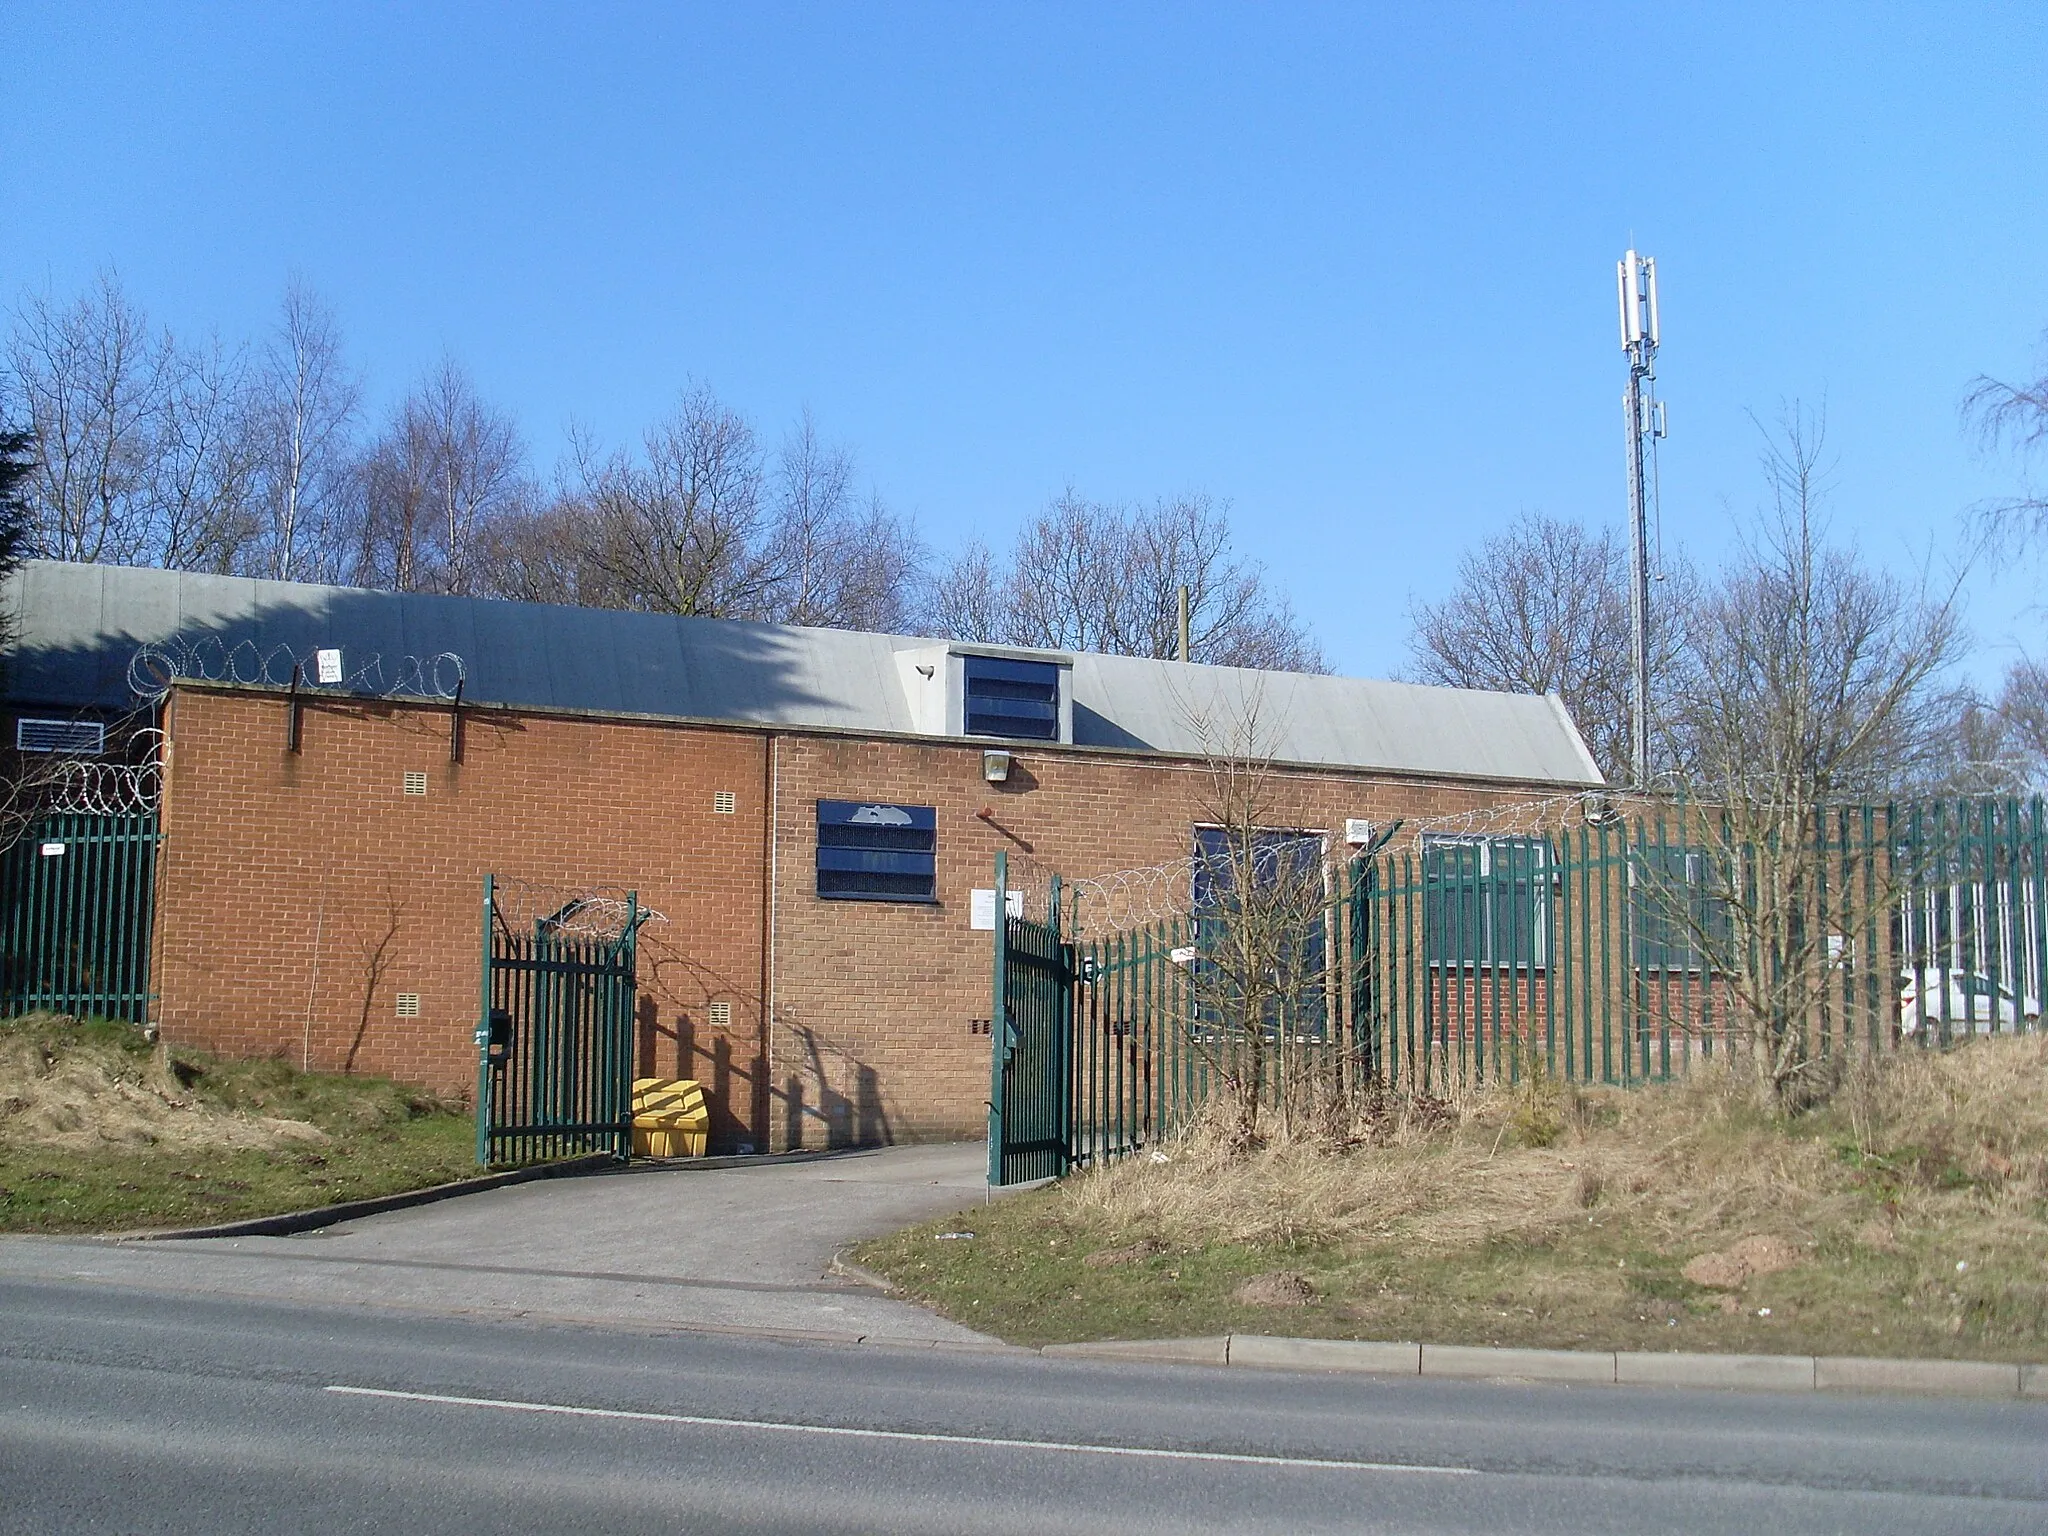 Photo showing: Telephone Exchange, New Ollerton This TE is situated on the B6387 Retford Road, Boughton, NG22 9JN adjacent to a disused railway line. Its appearance is not enhanced by the green fencing and razor sharp wiring above it. The mobile phone mast can be seen on the right of the photo.